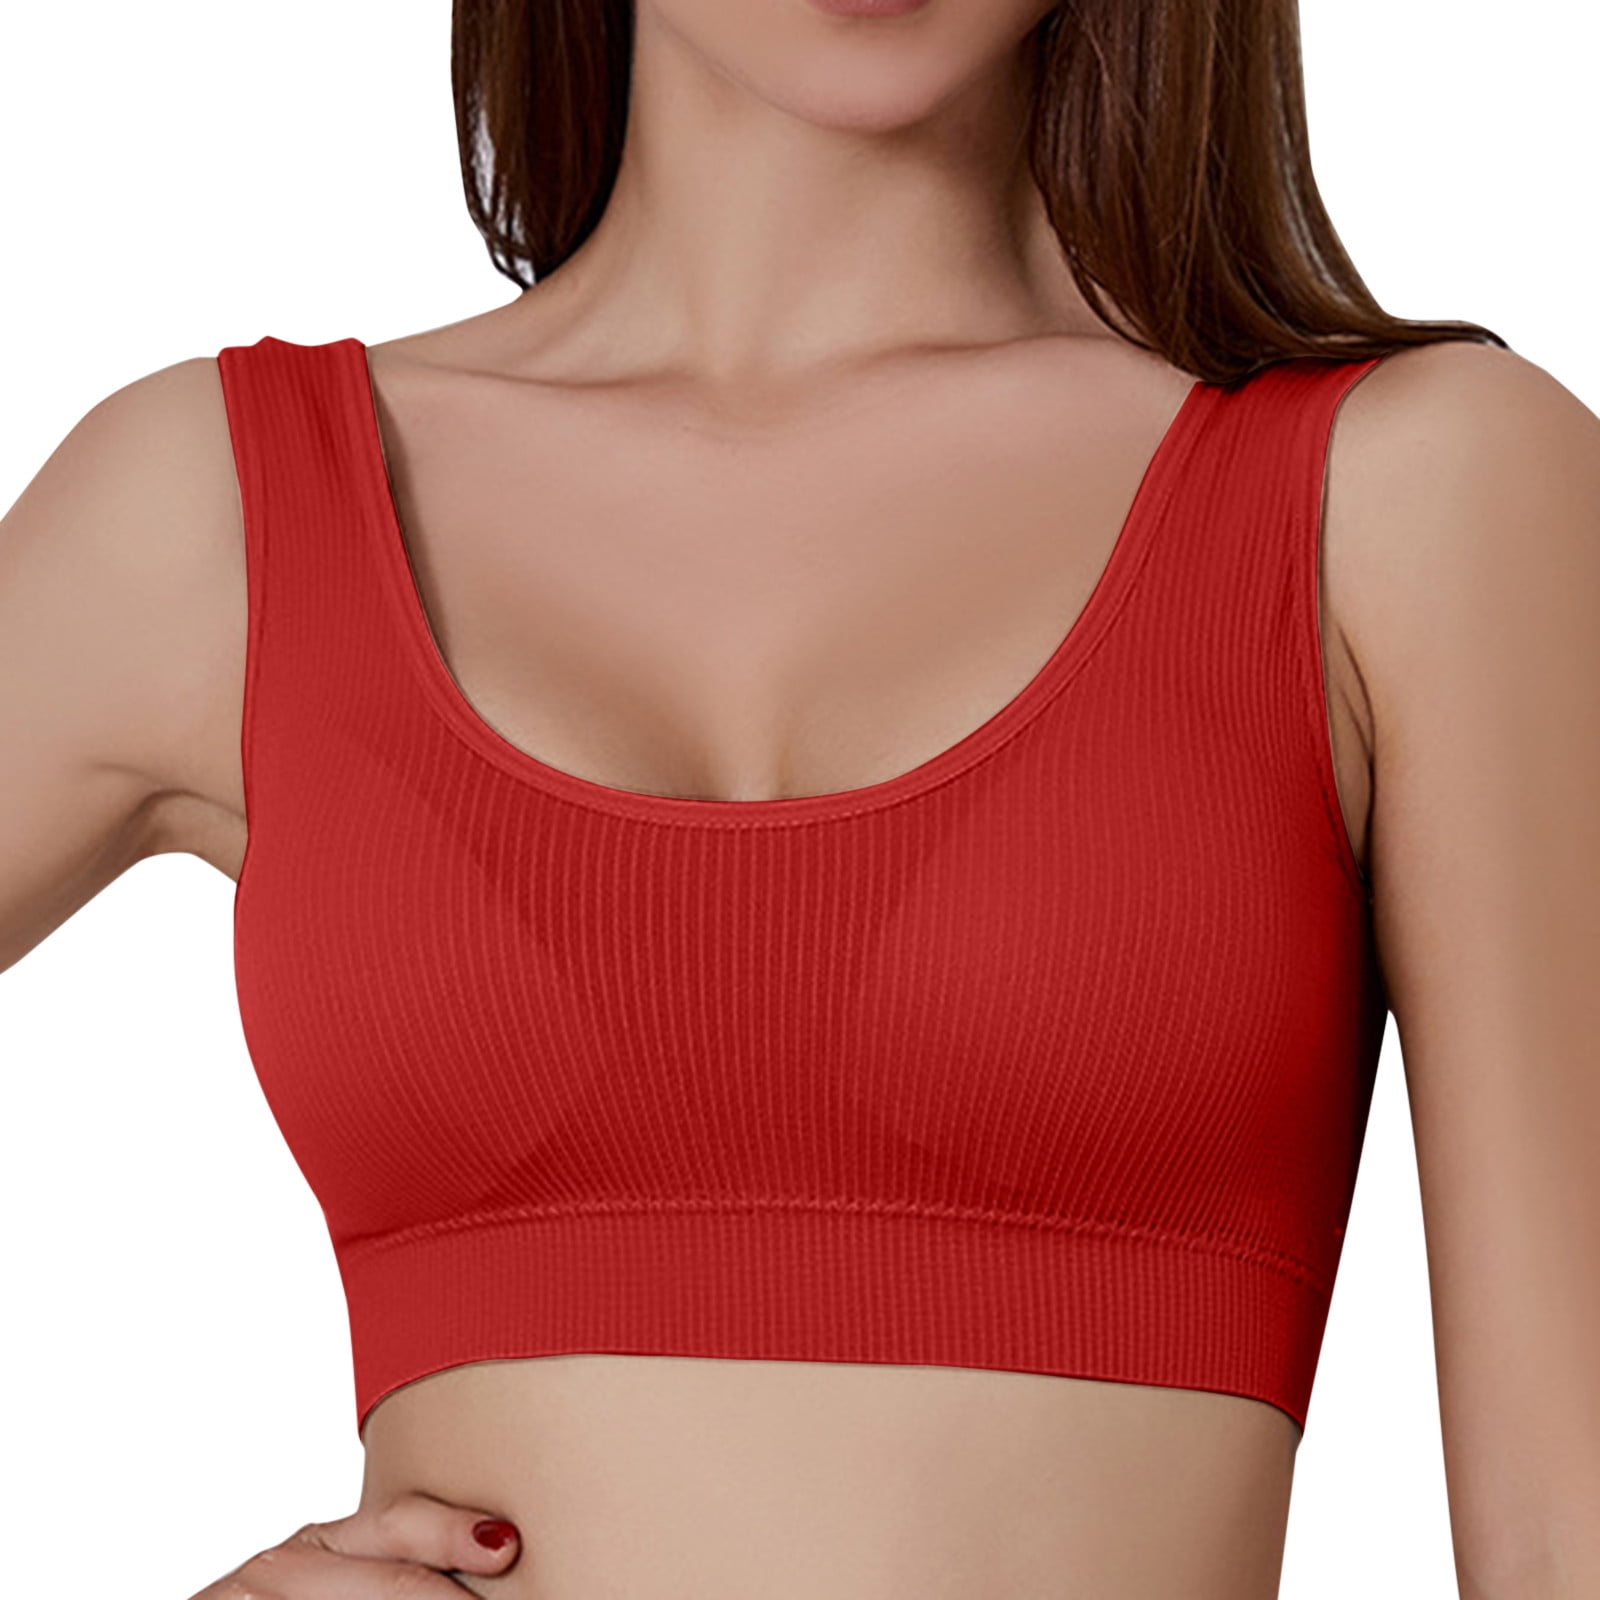 CAICJ98 Womens Lingerie Sports Bra for Women, Flow Y Back Strappy Sports  Bras M Support Yoga Gym Top with Removable Pad Red,L